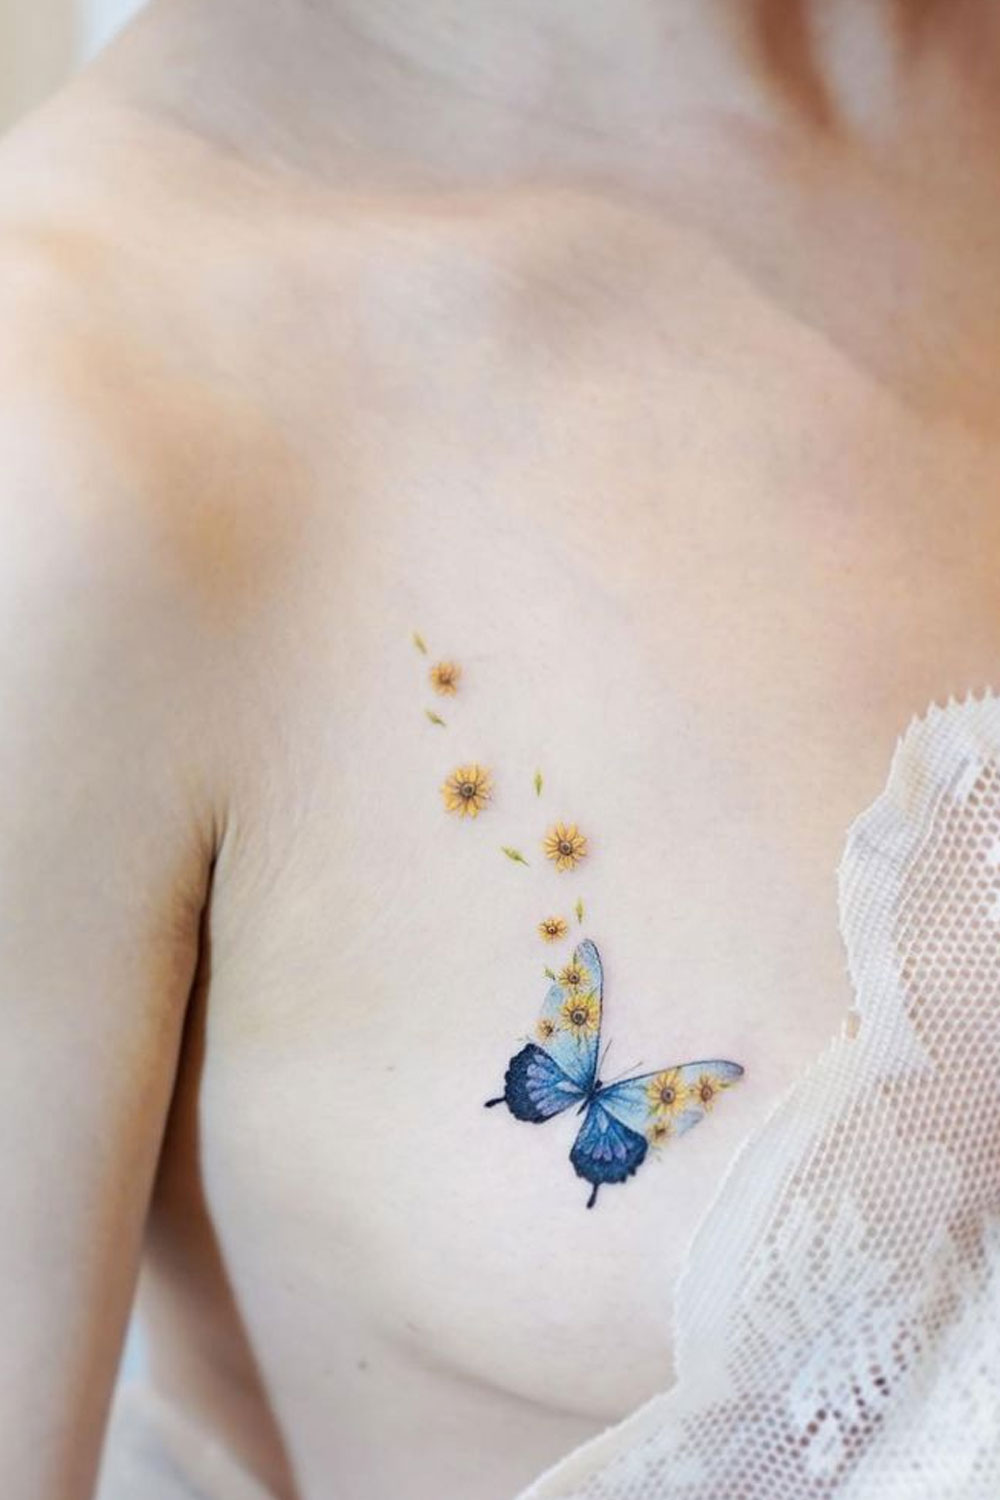 Floral Butterfly Tattoo on a Breast